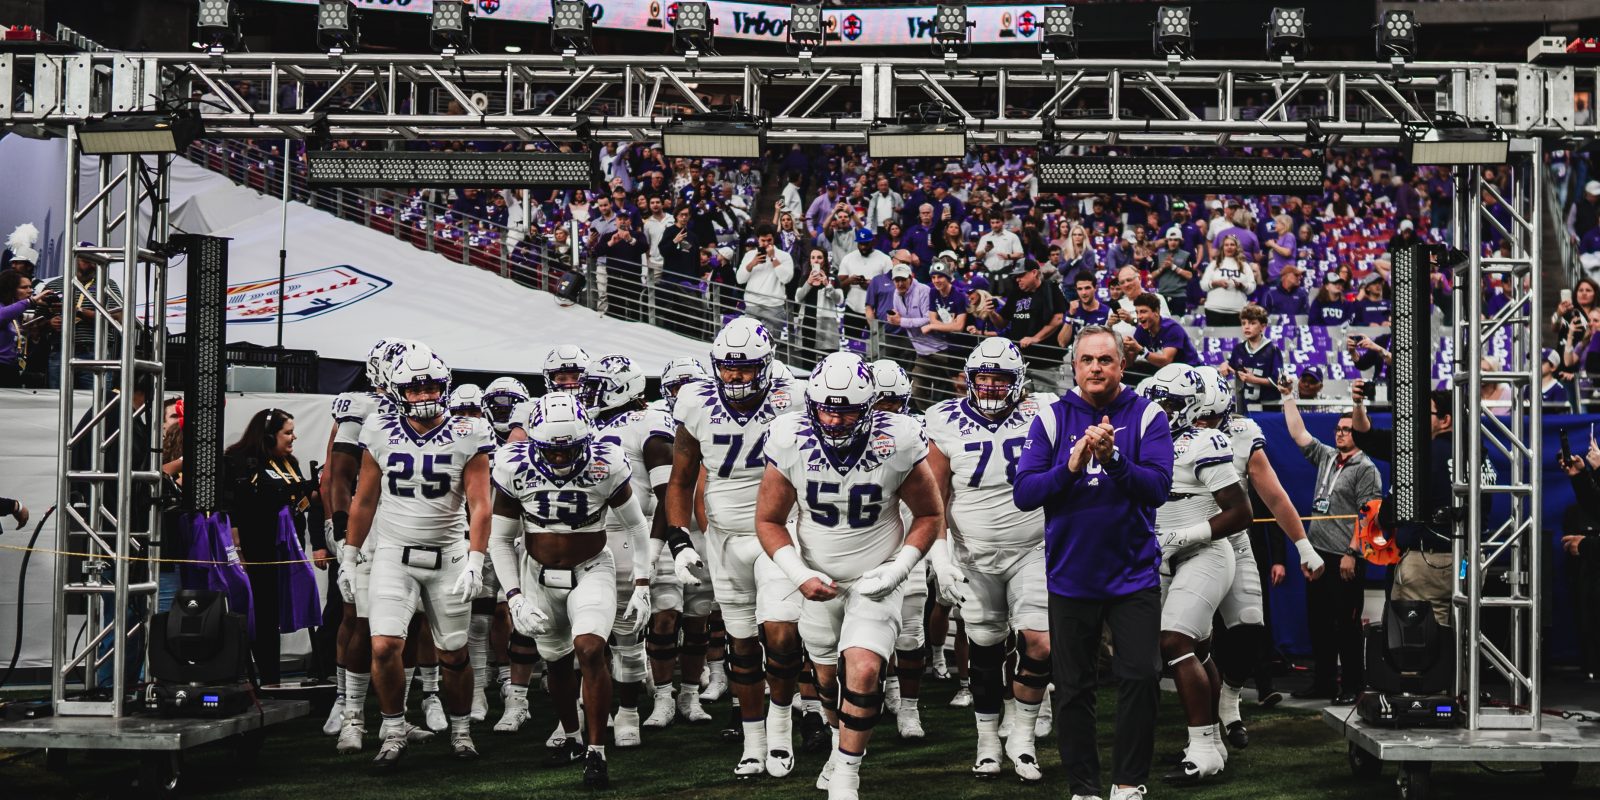 The TCU Football team prepares to take the field at State Farm Stadium in Glendale, Arizona. The Frogs were the first team from Texas to compete in the College Football Playoff. Courtesy of TCU Athletics